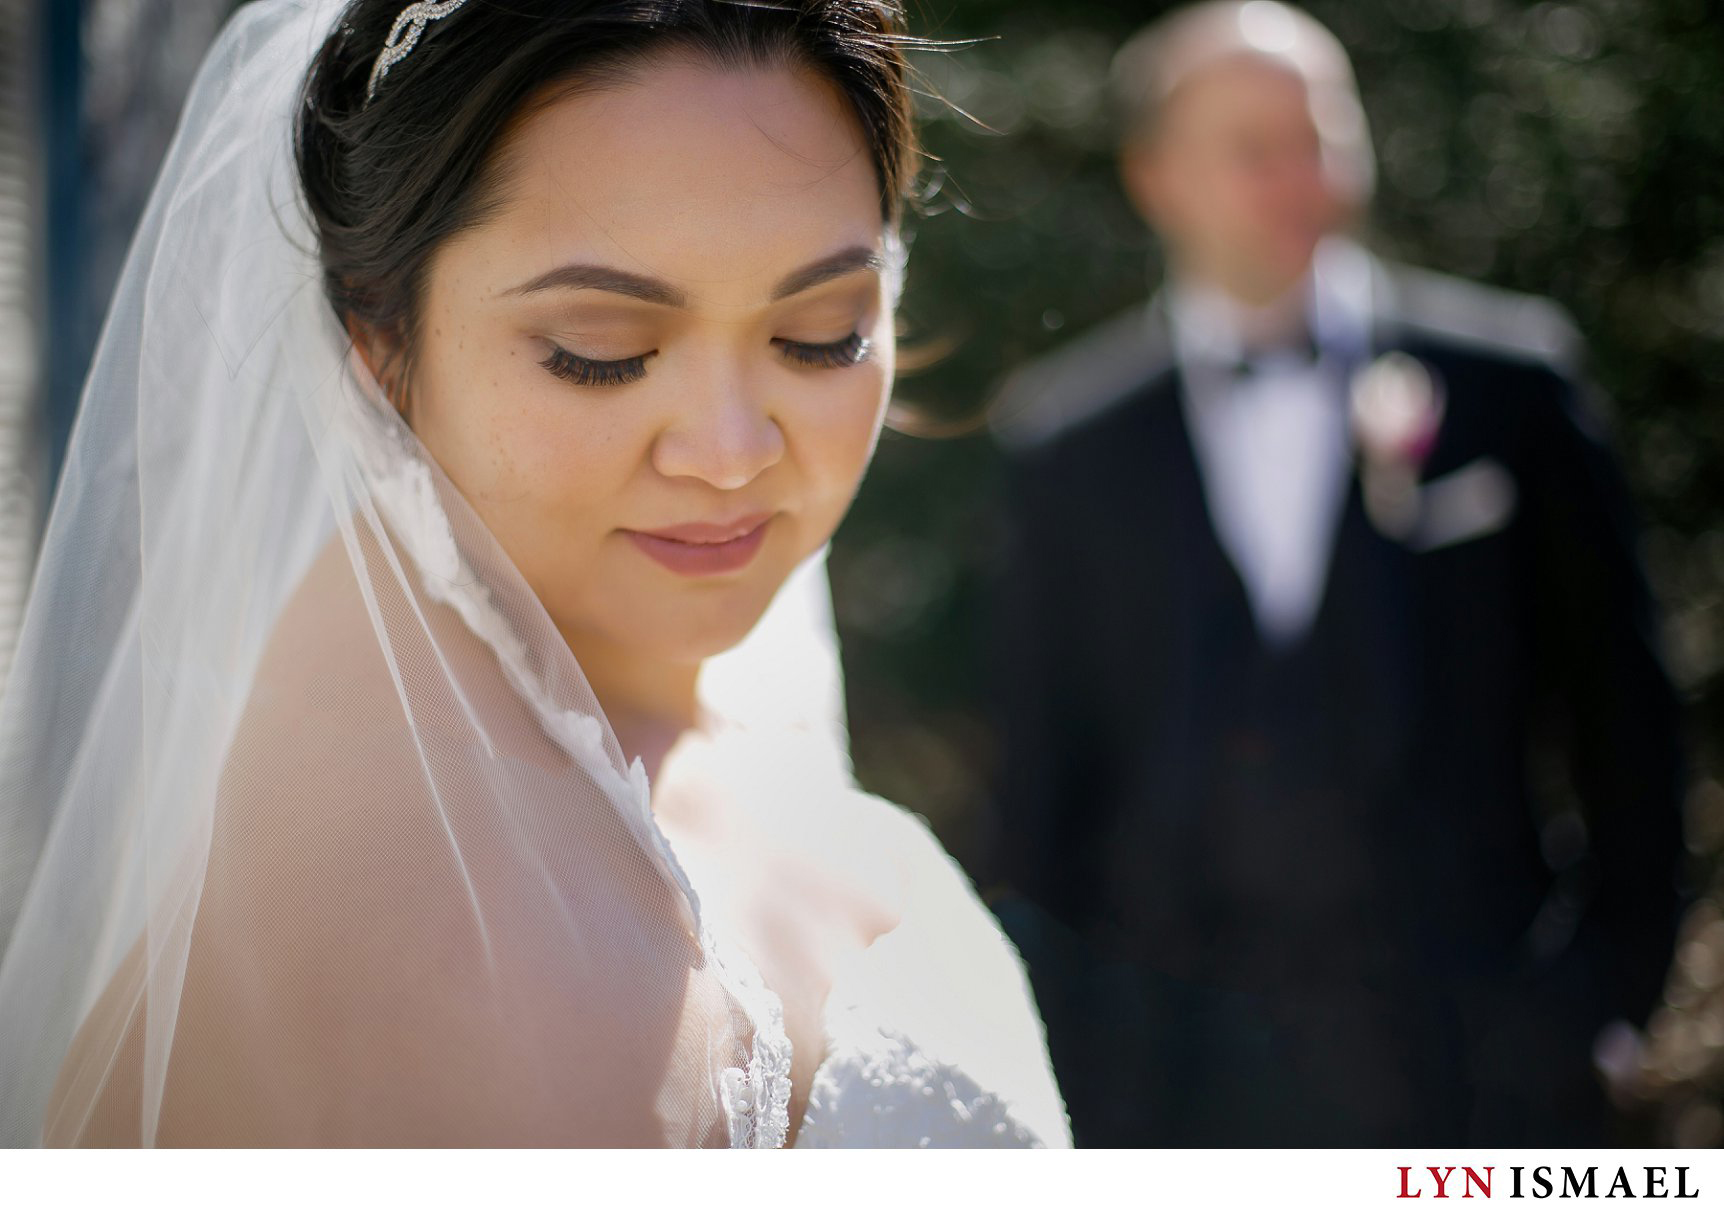 portrait of a bride with the groom in the background at Adamson Estate in Mississauga, Ontario.